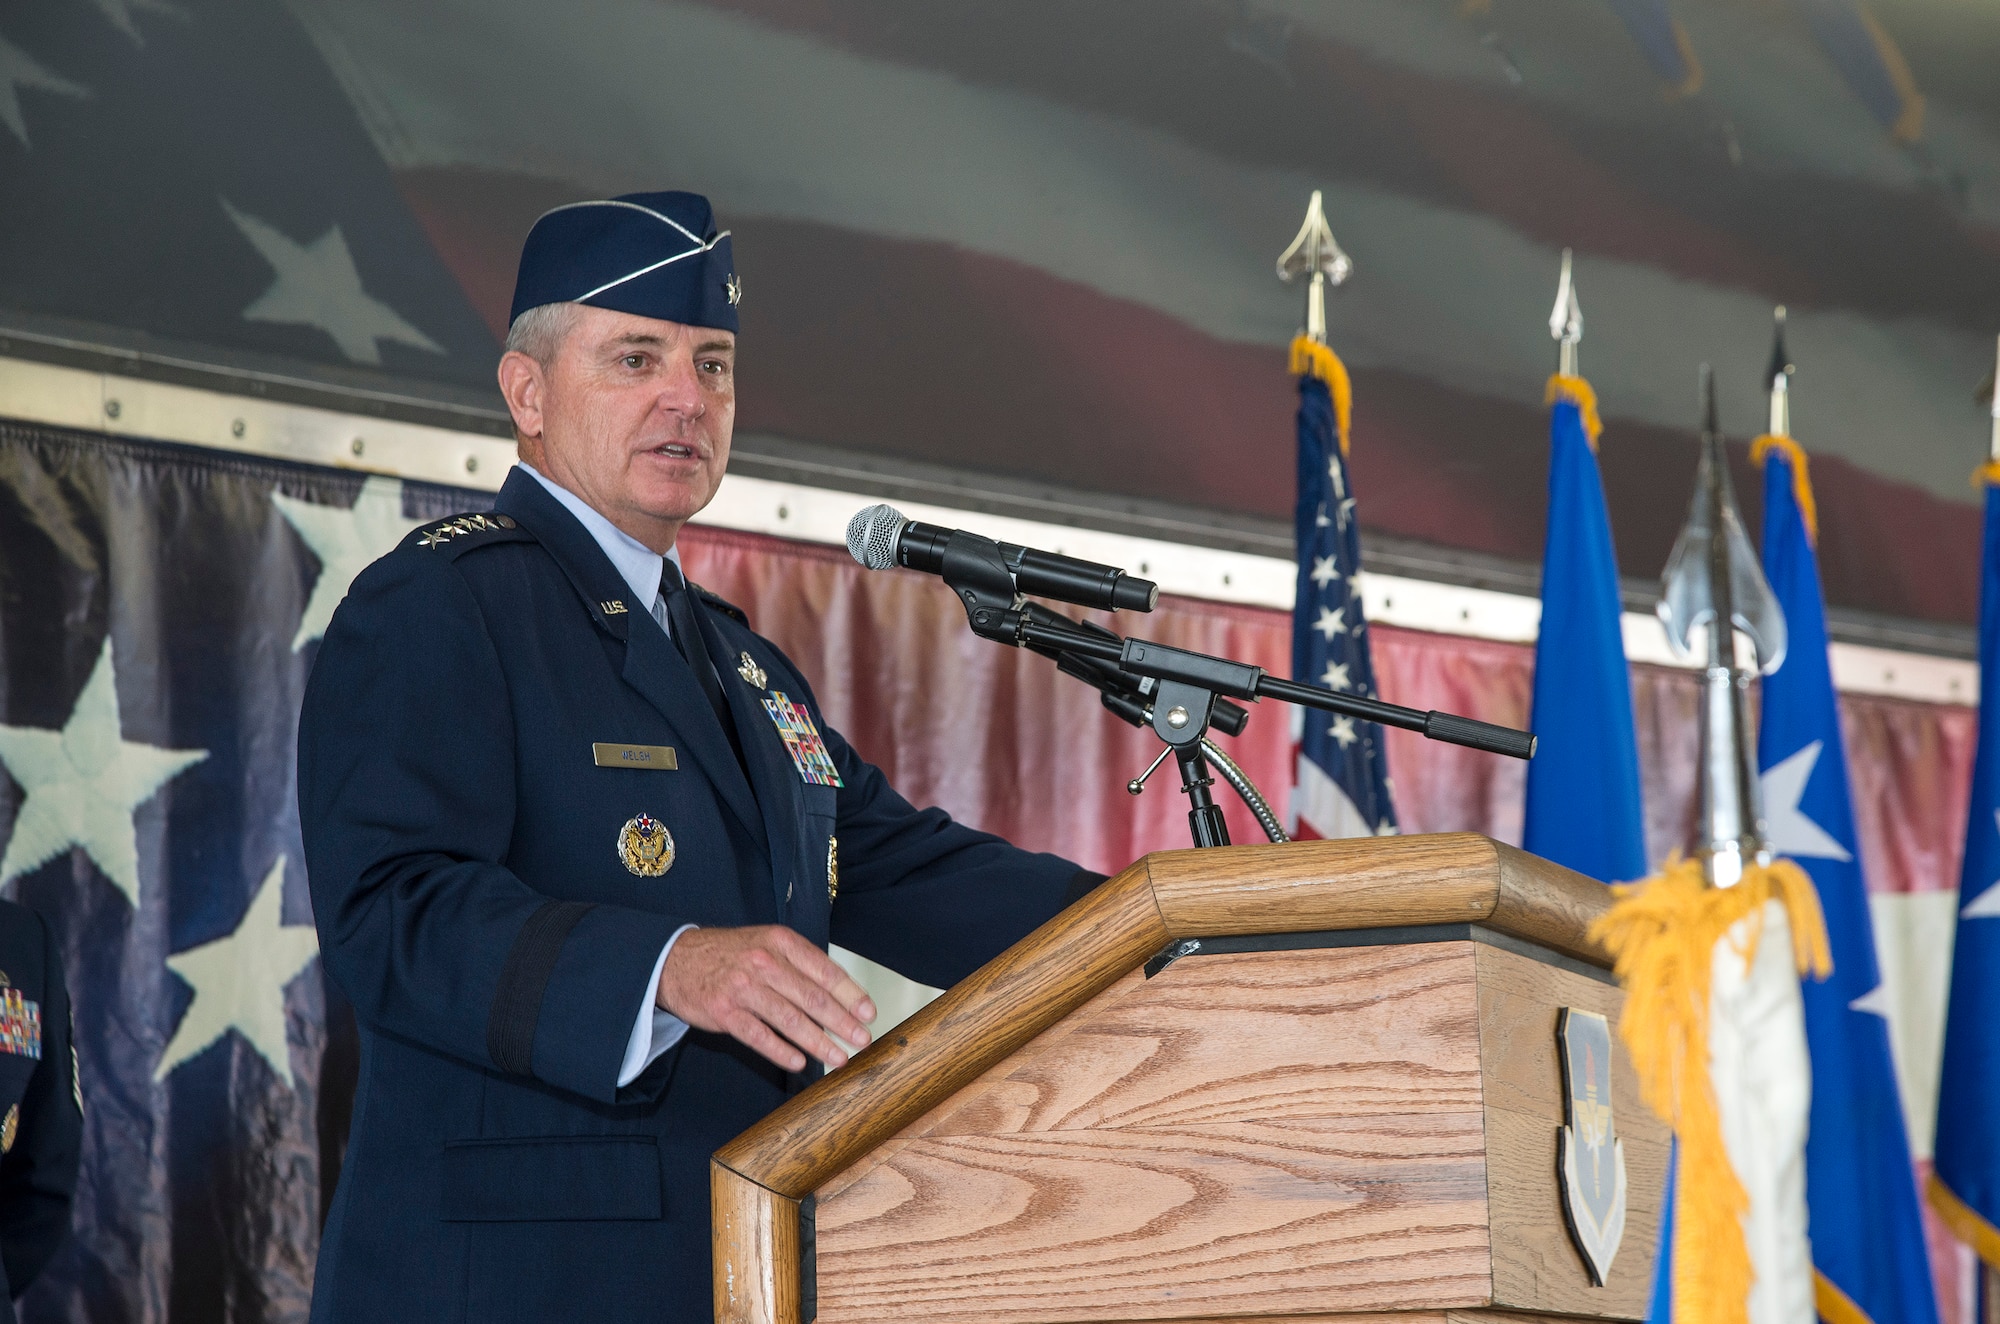 JOINT BASE SAN ANTONIO-RANDOLPH, Texas -- Air Force Chief of Staff Gen. Mark A. Welsh III speaks to attendees during the Air Education and Training Command change of command ceremony at Joint Base San Antonio-Randolph, Texas, July 21, 2015. Air Education and Training Command includes more than 60,000 active duty, Air Reserve component members and civilian personnel and 1,300 aircraft. The mission of AETC is to recruit, train and educate Airmen to deliver Air Power for America. (U.S. Air Force photo by Johnny Saldivar) 